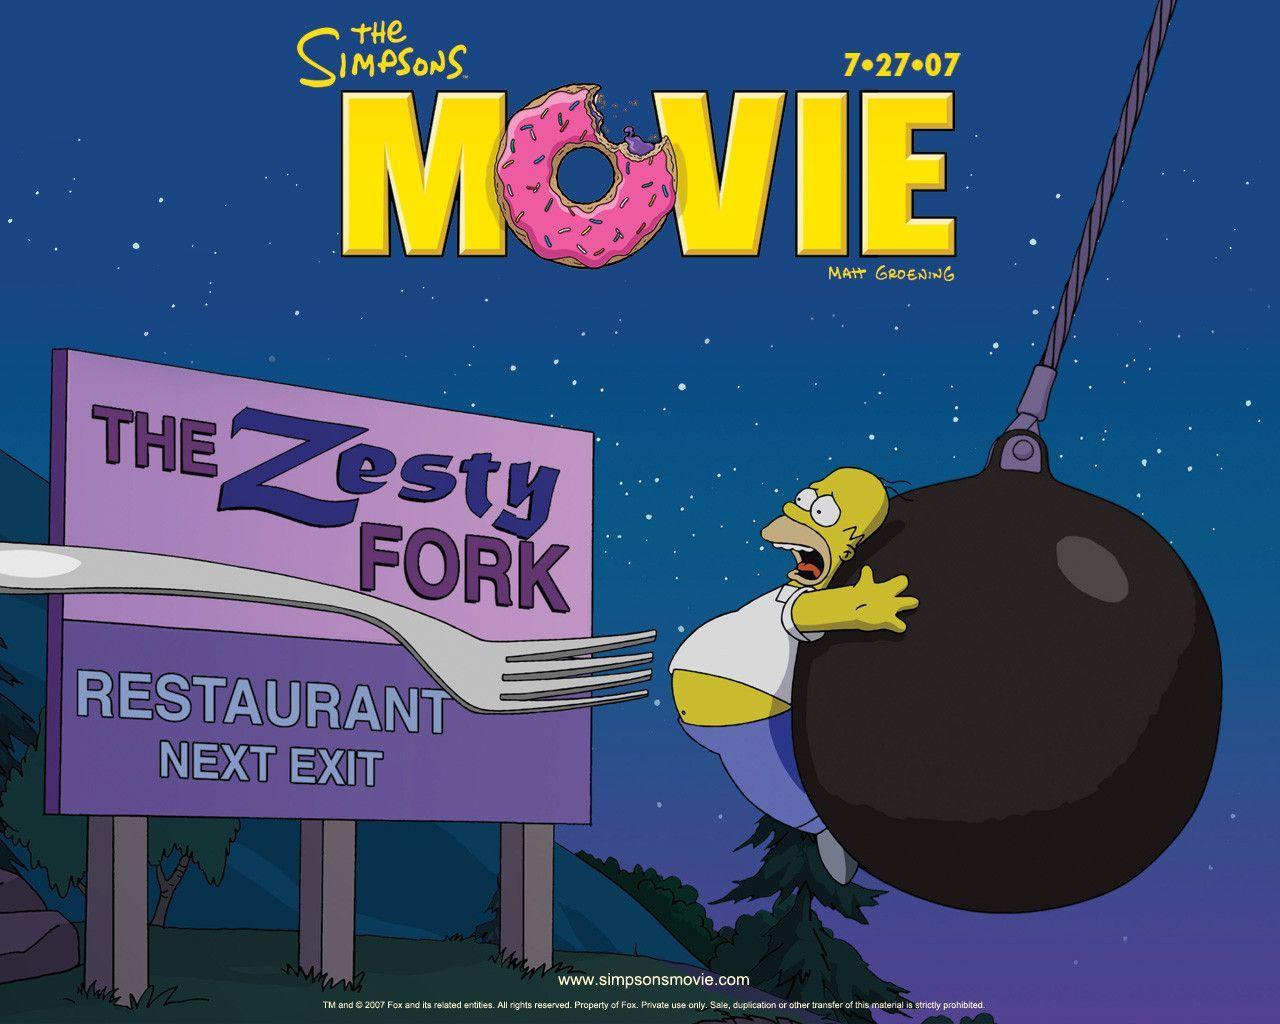 Simpsons Movie Wallpaper. coolstyle wallpaper